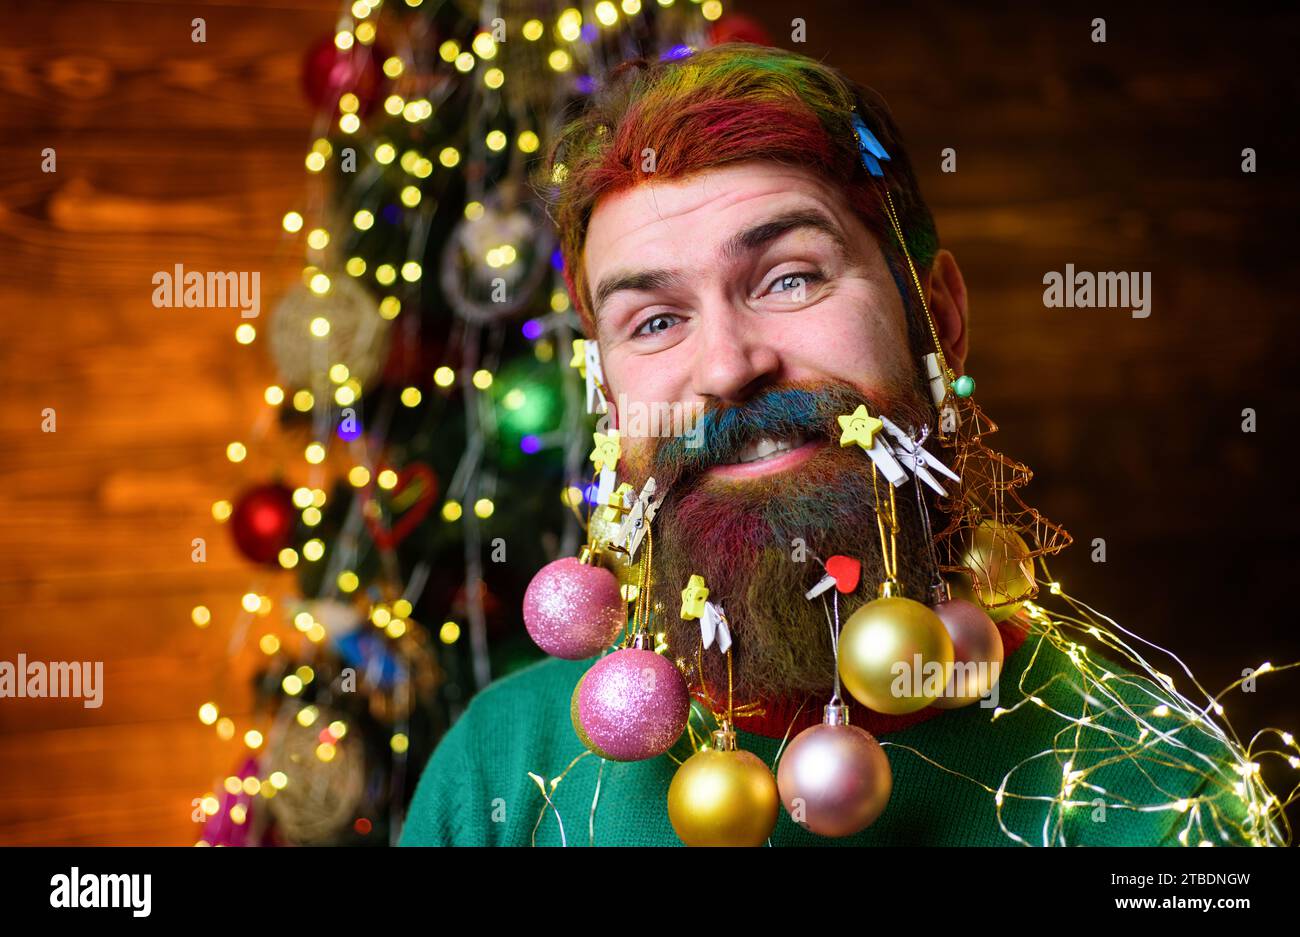 Christmas beard decorations. Closeup portrait of smiling man with decoration balls in beard. Merry Christmas and Happy New year. Happy bearded man Stock Photo